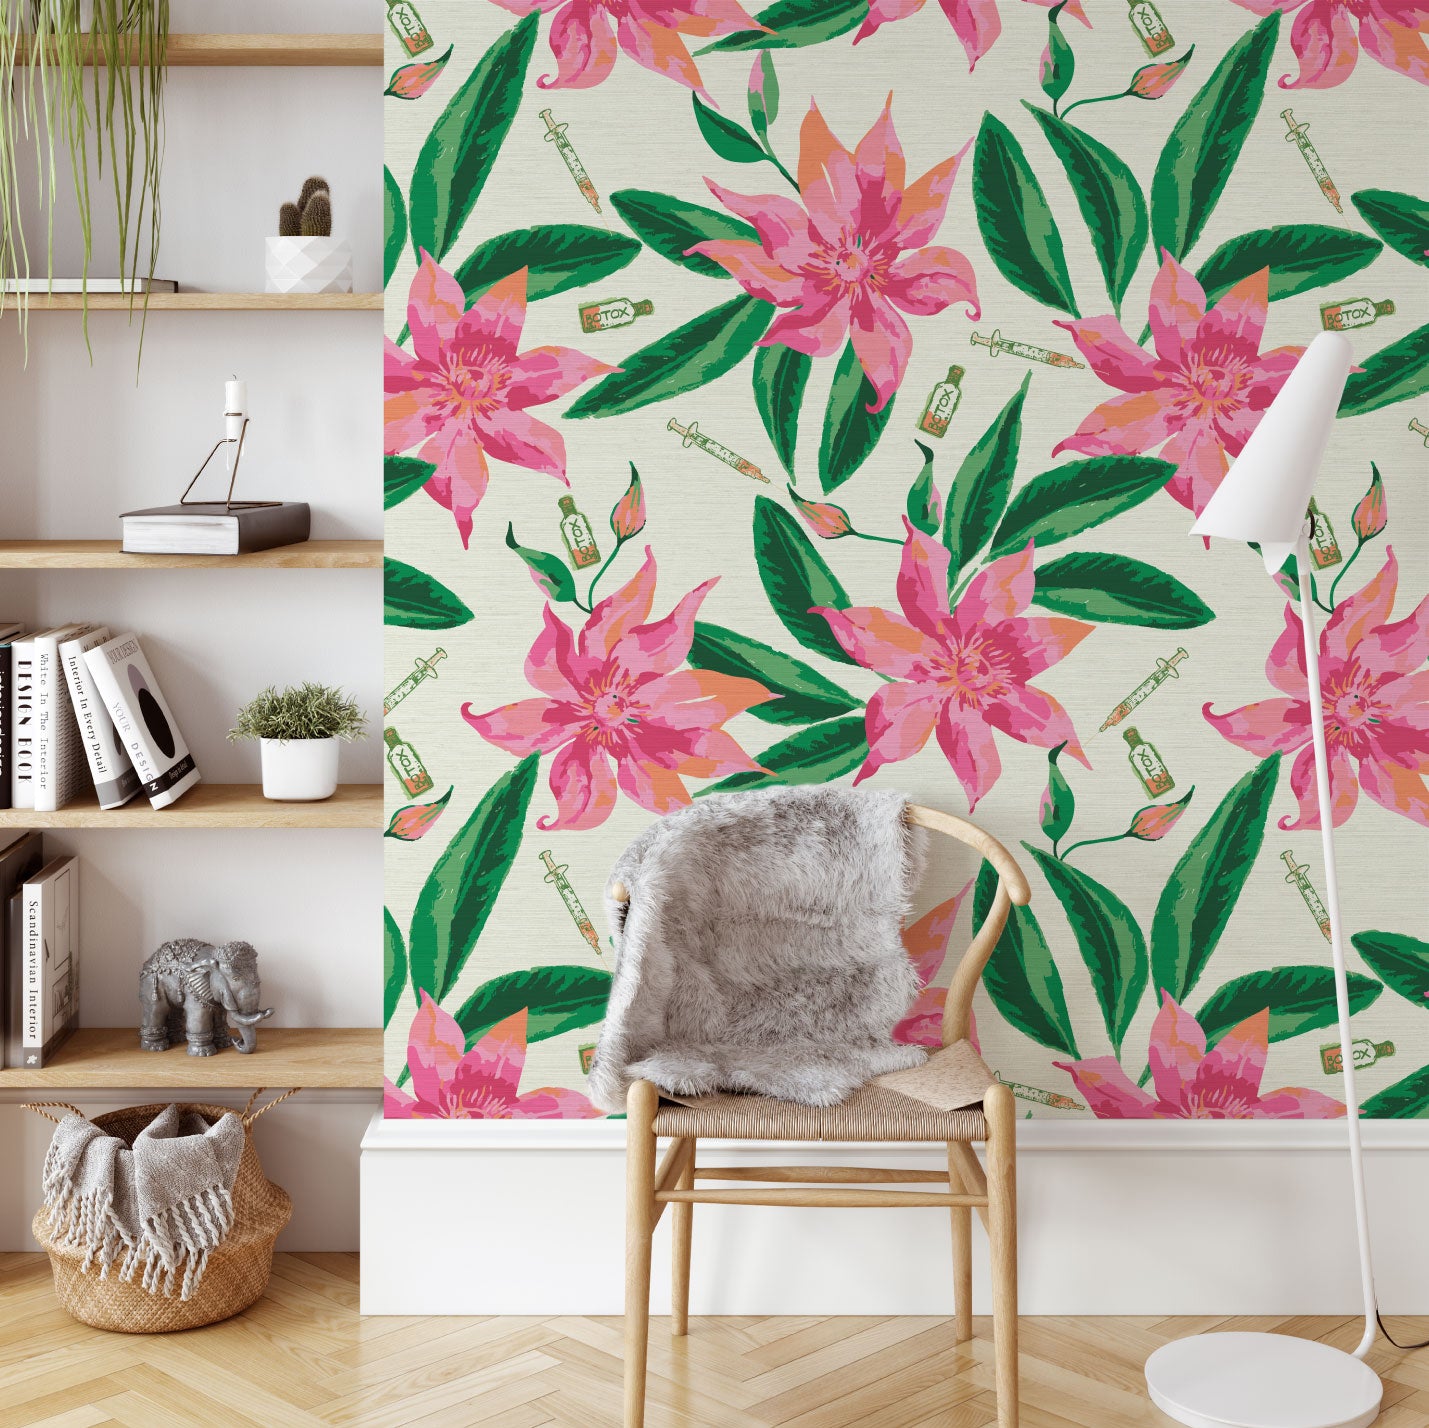 Load image into Gallery viewer, white based grasscloth printed wallpaper with oversized pink flowers and big green leafs with botox bottles and botox syringes scattered throughout the print.
